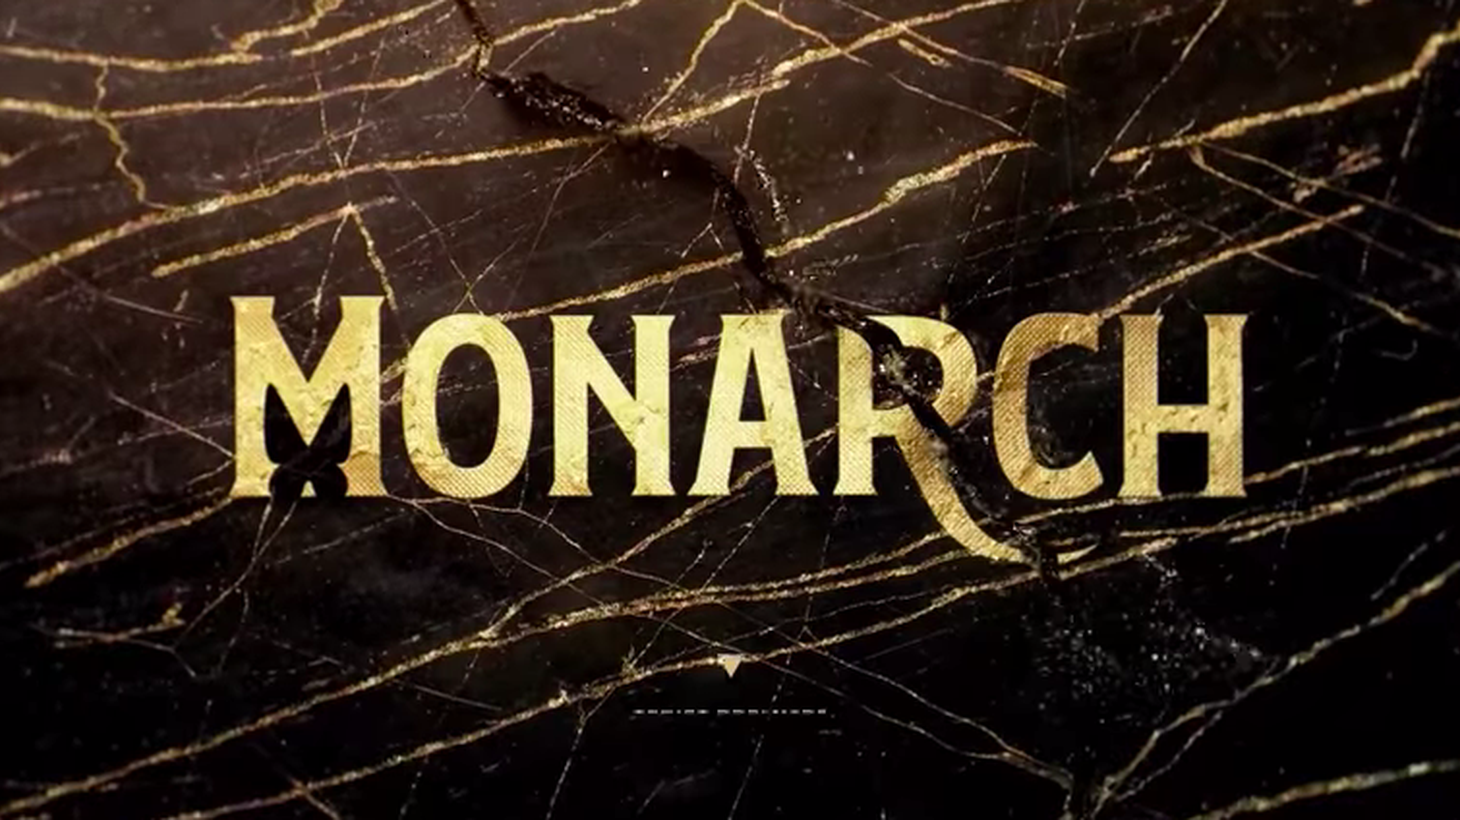 “Monarch” is about the drama within a family of country music stars.